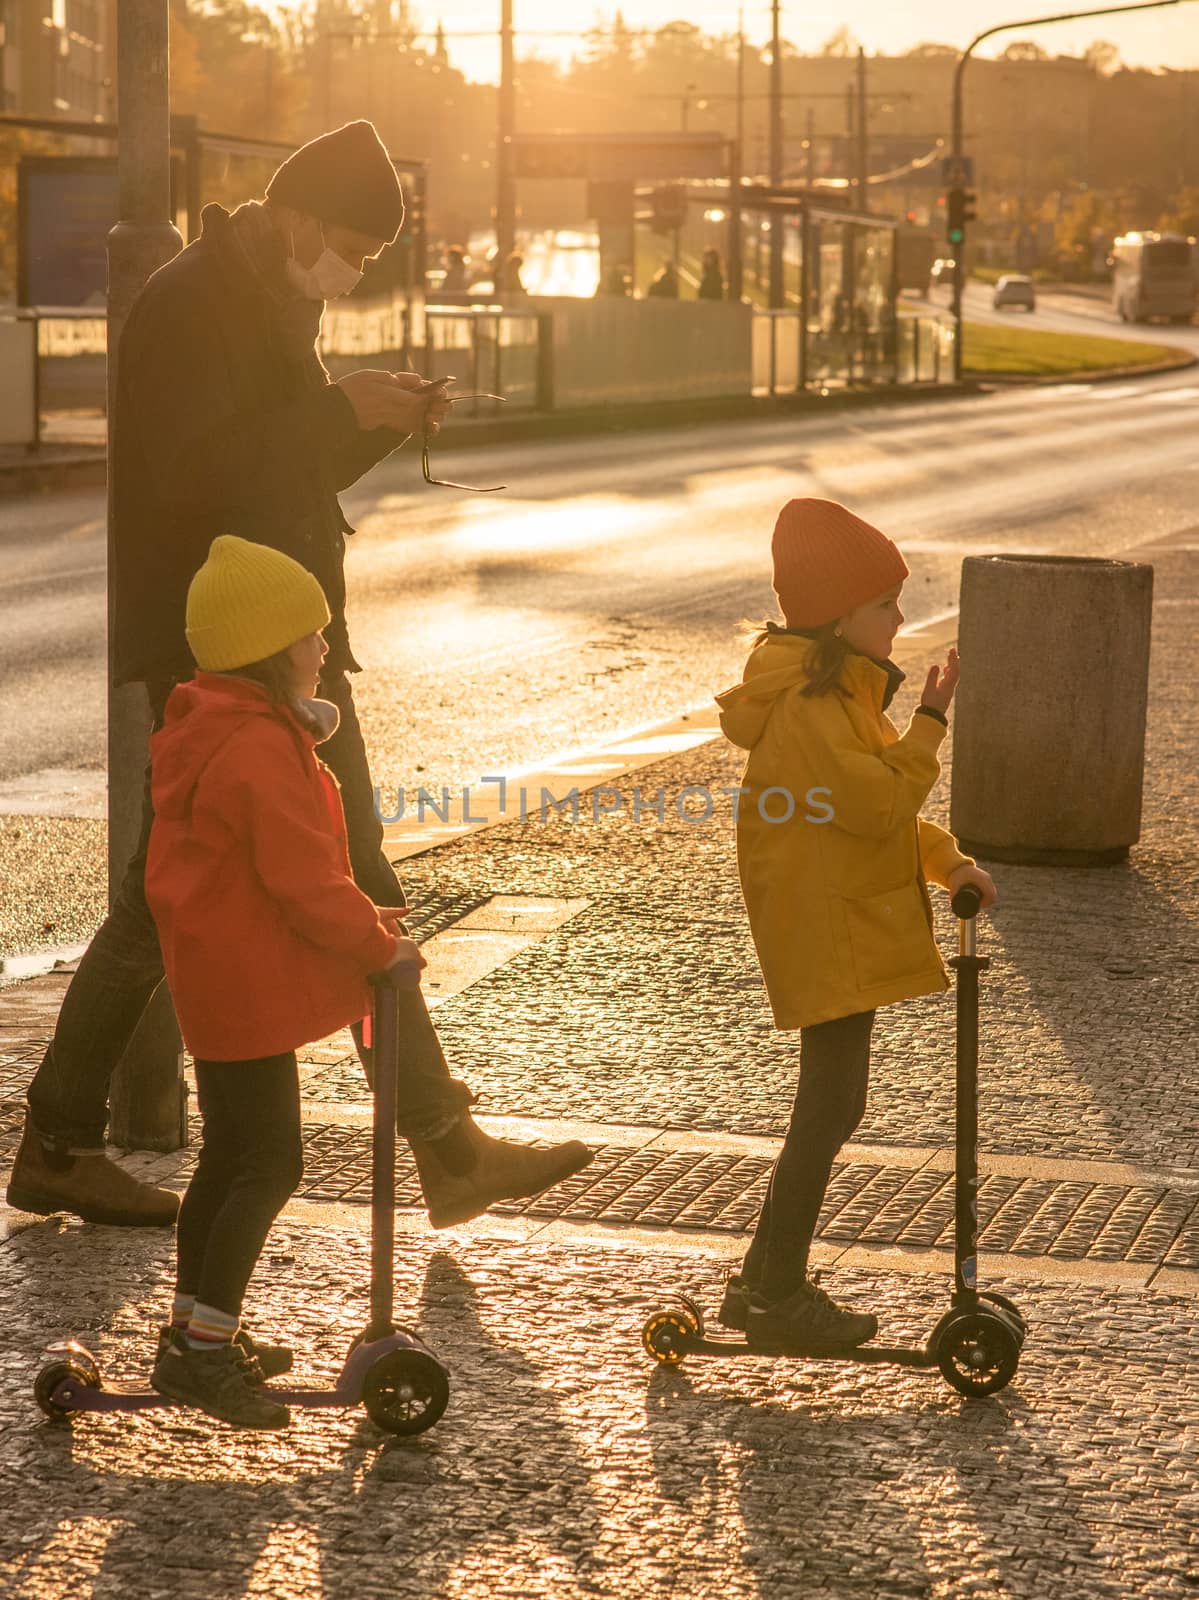 Father and two daug03/04/2018. Brno, Czech Republic. hters with mask are crossing the street at Hradcanska metro station with scooters during quarantine period due to outbreak of COVID-19 as winter is starting. Prague, Czech Republic by gonzalobell